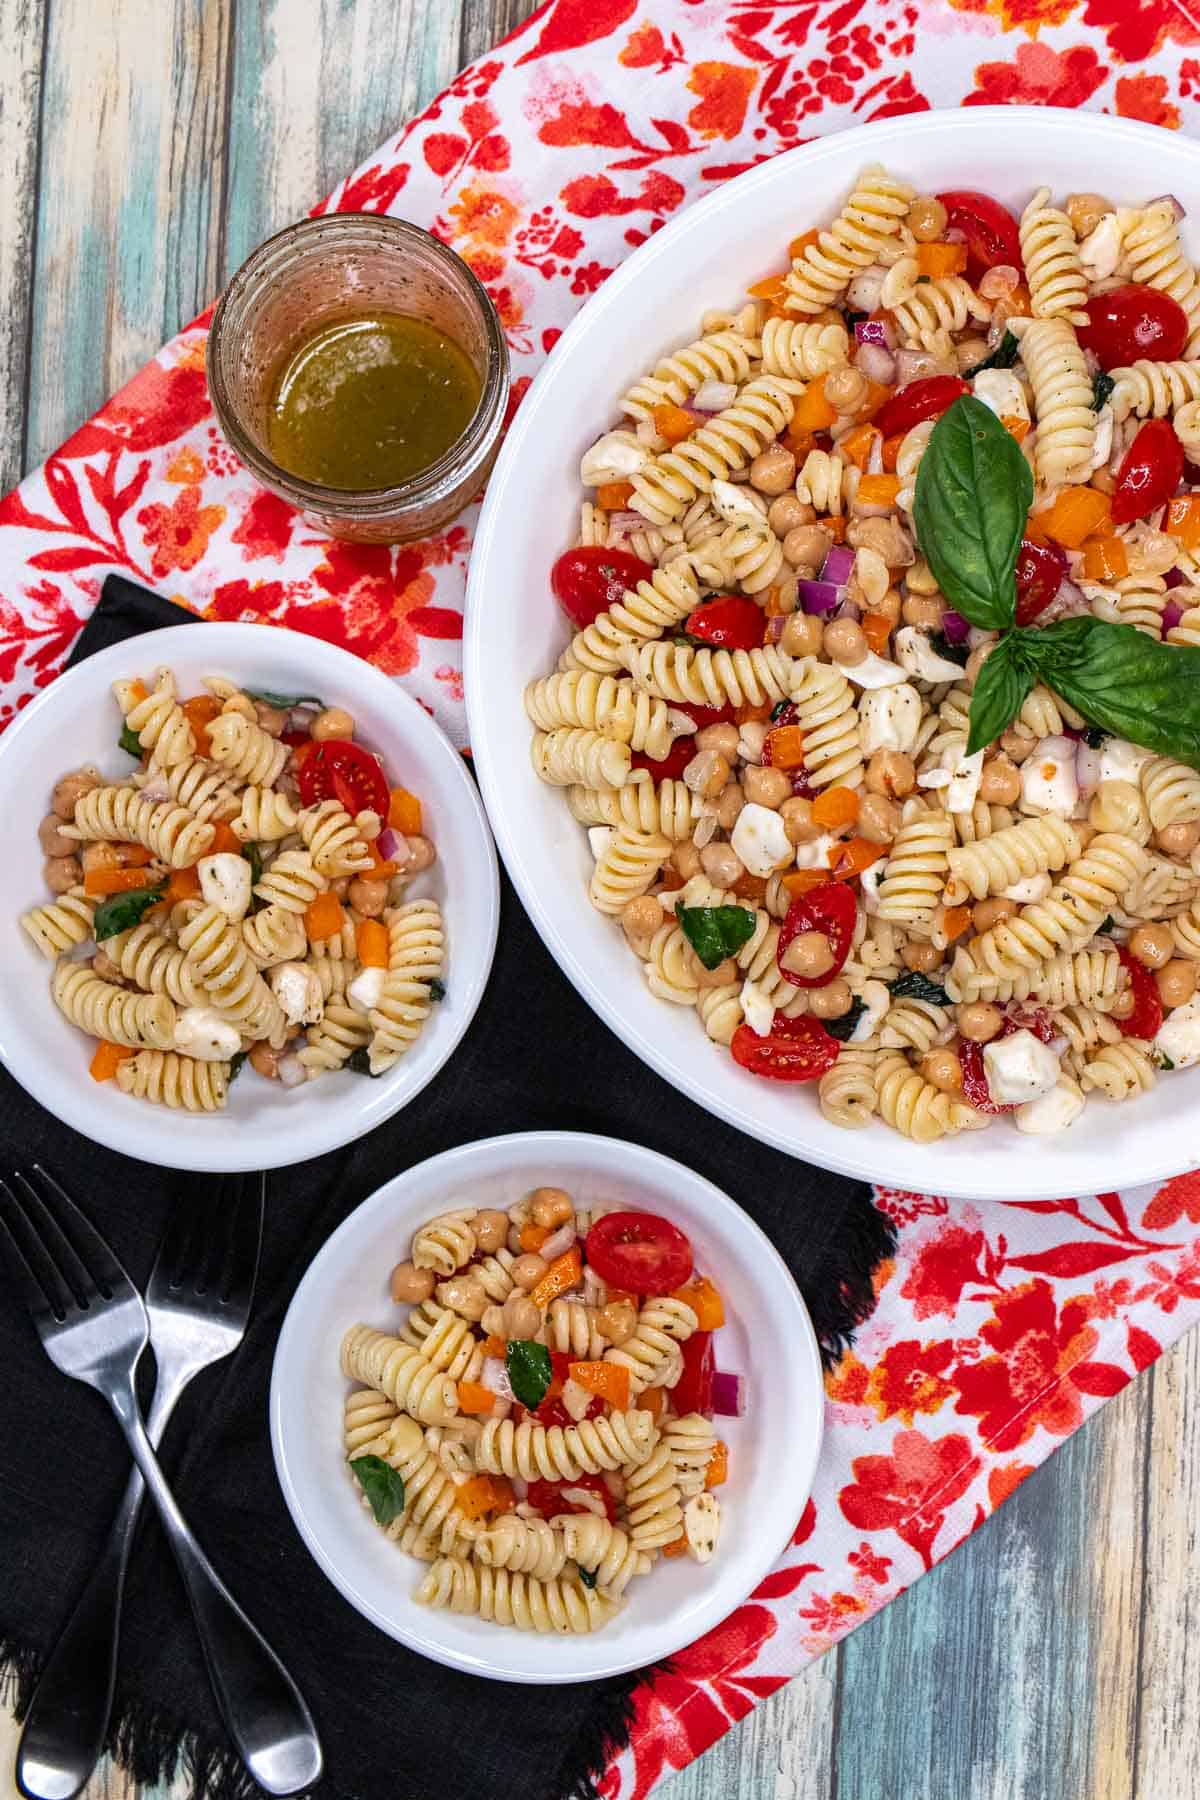 Overhead view of a large bowl of cold pasta salad with two side bowls filled with some next to it.